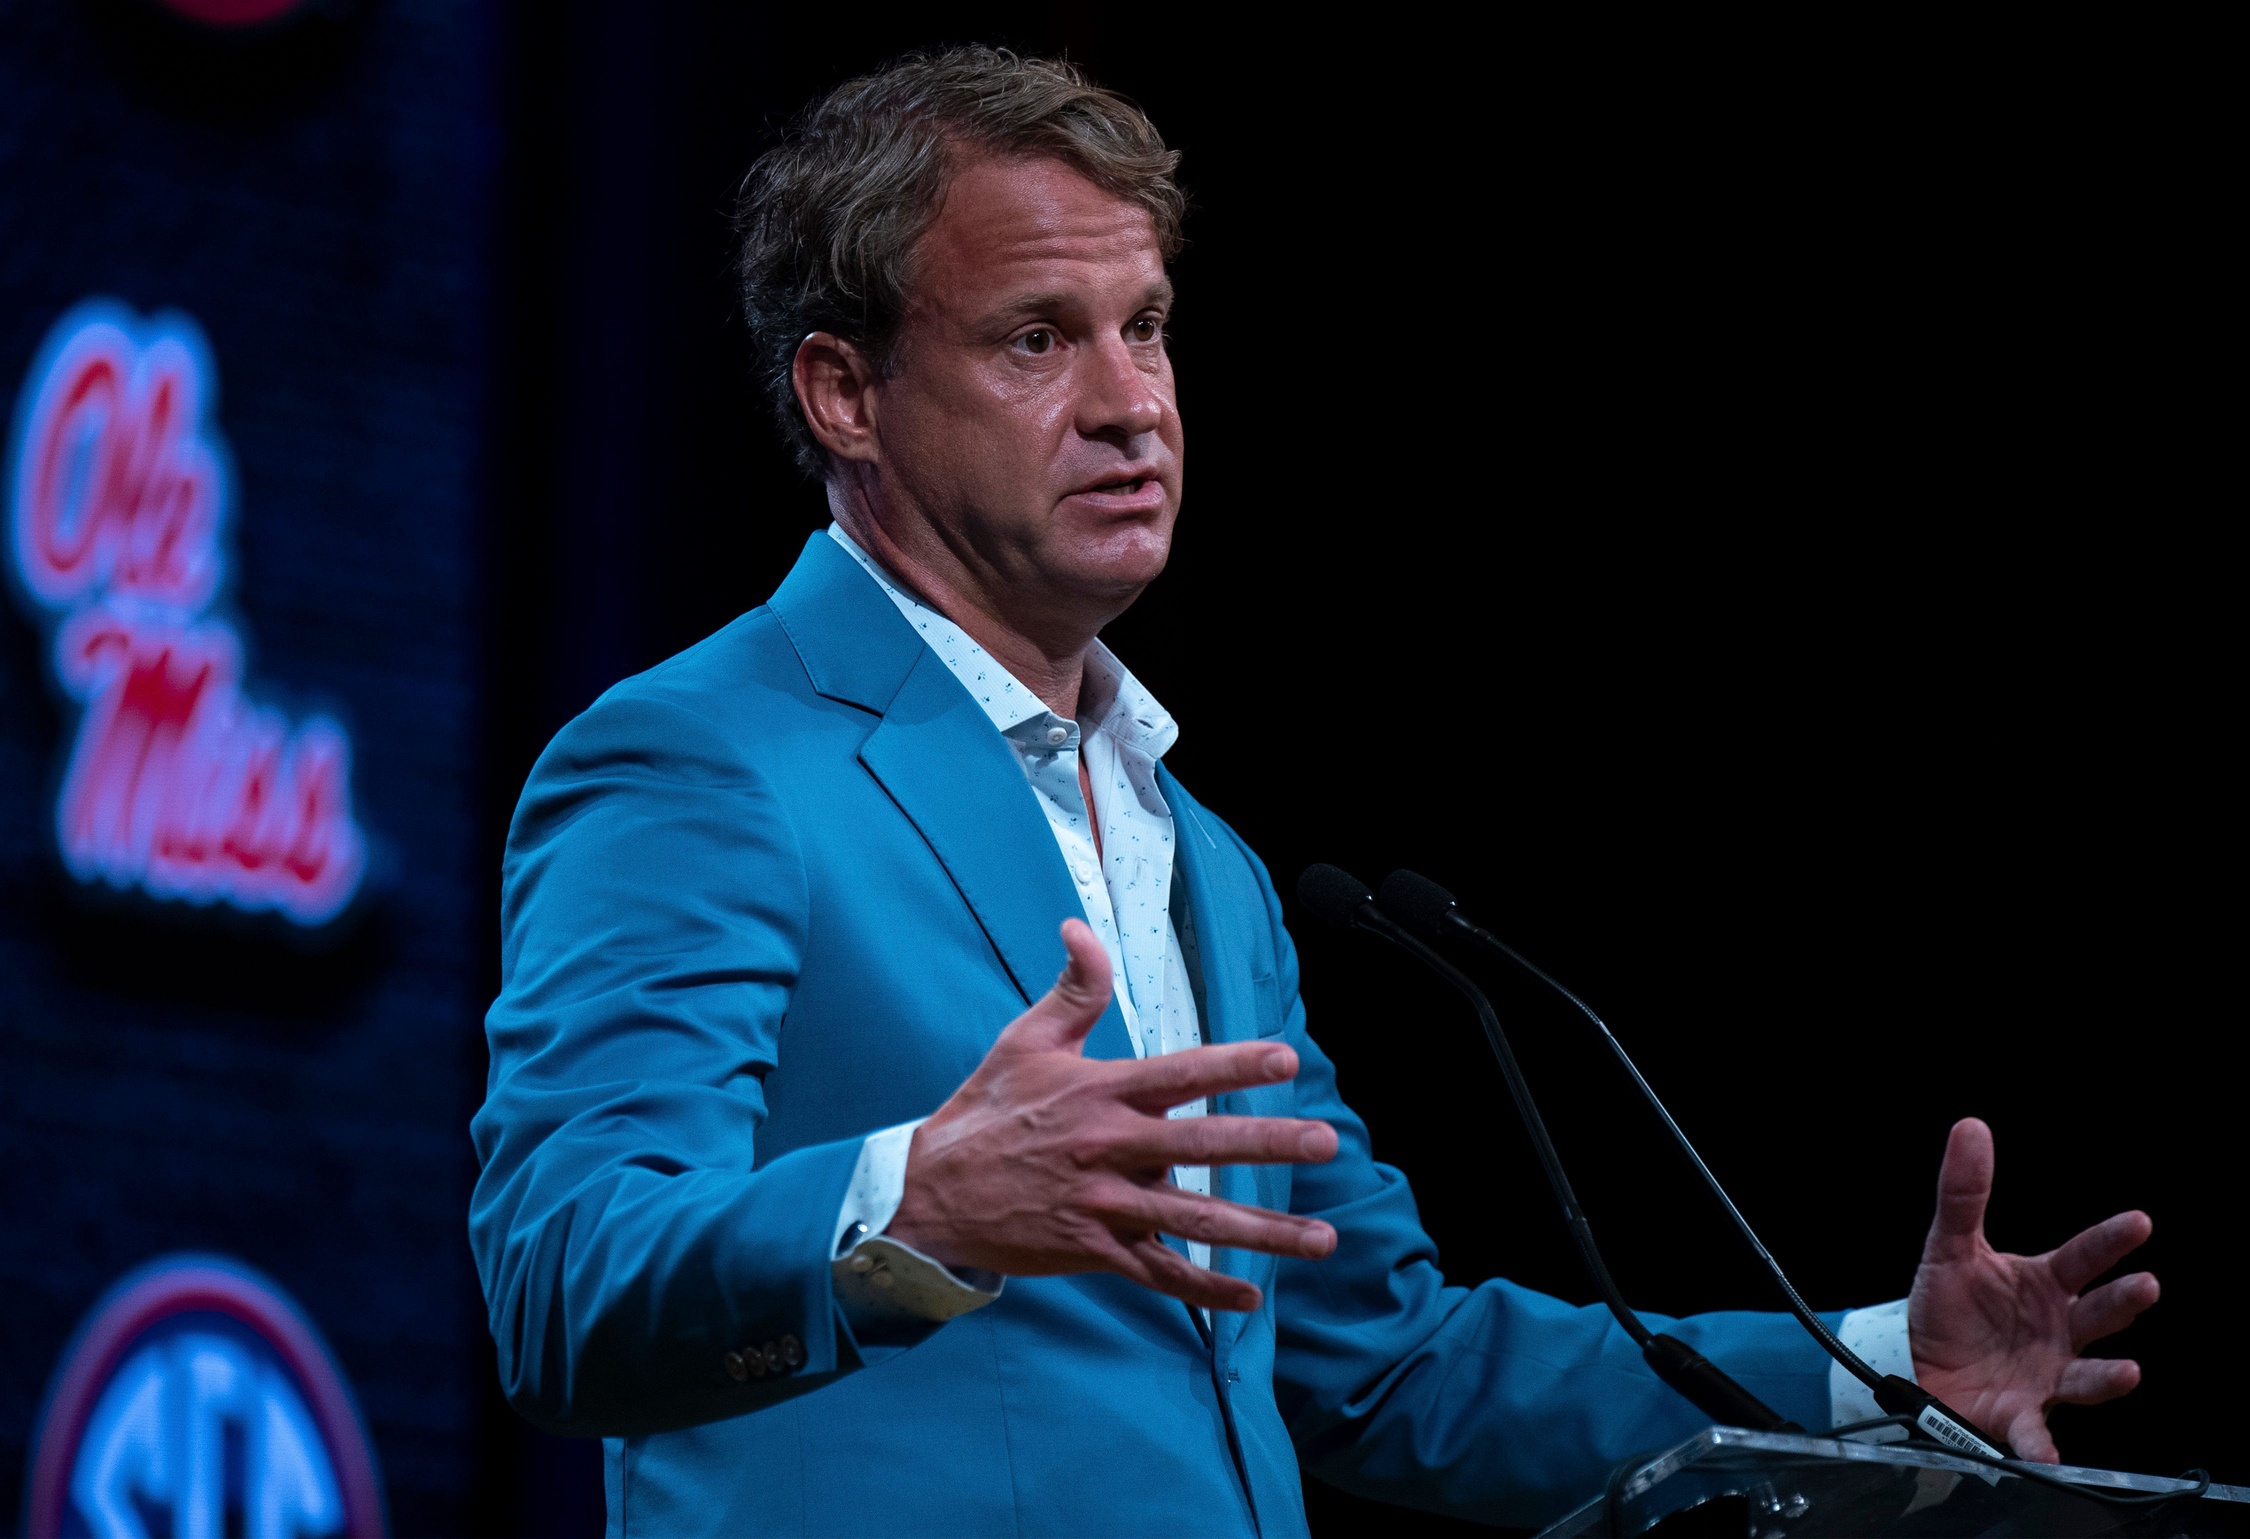 SEC Media Days were held this week, and Ole Miss head coach Lane Kiffin wasted no time sounding off on NIL and the state of college football.